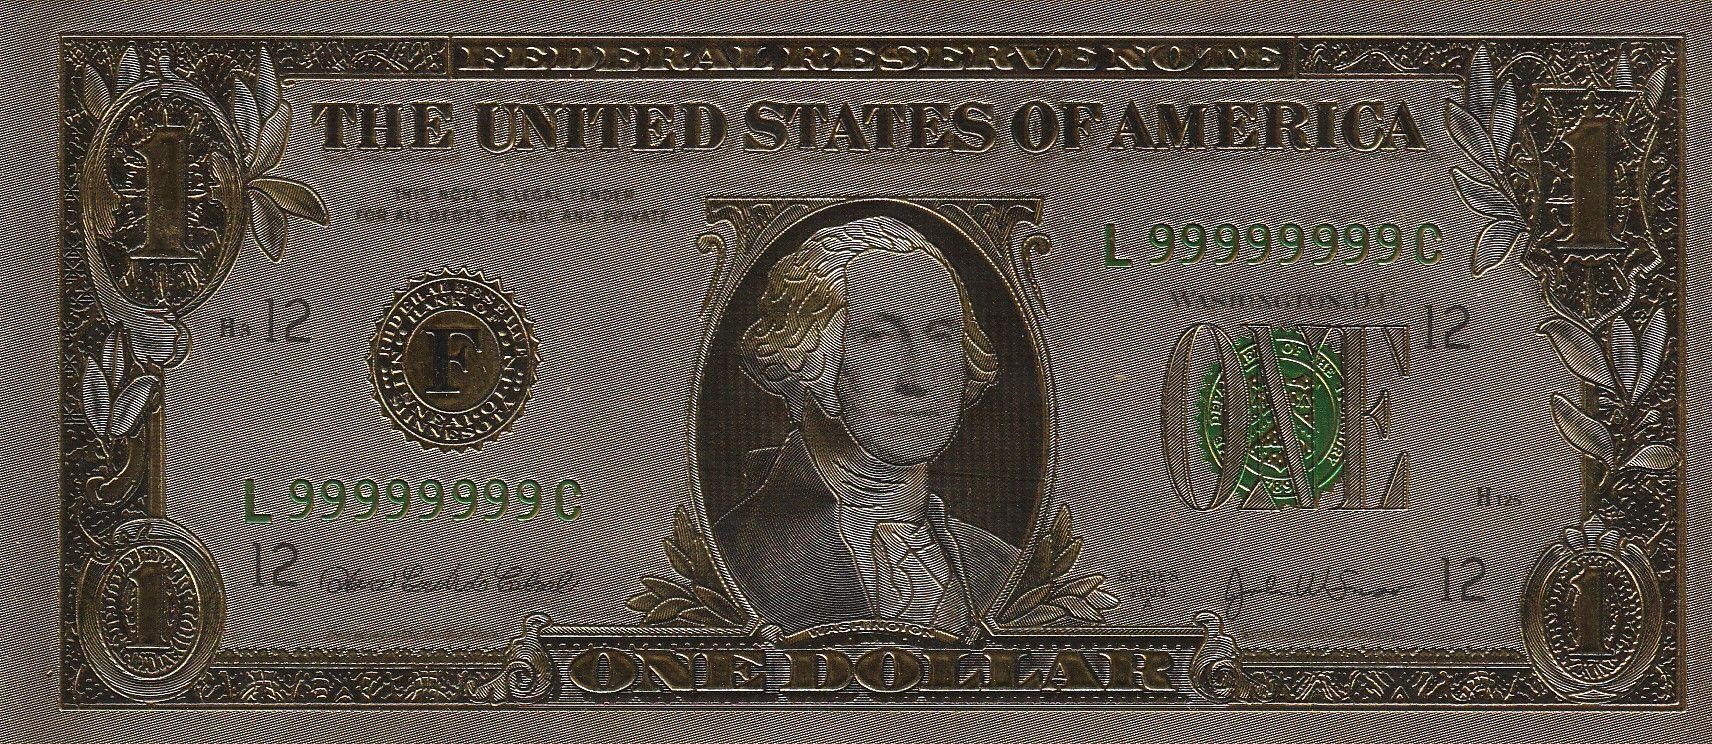 Gold Toned US Bank Note Facsimiles